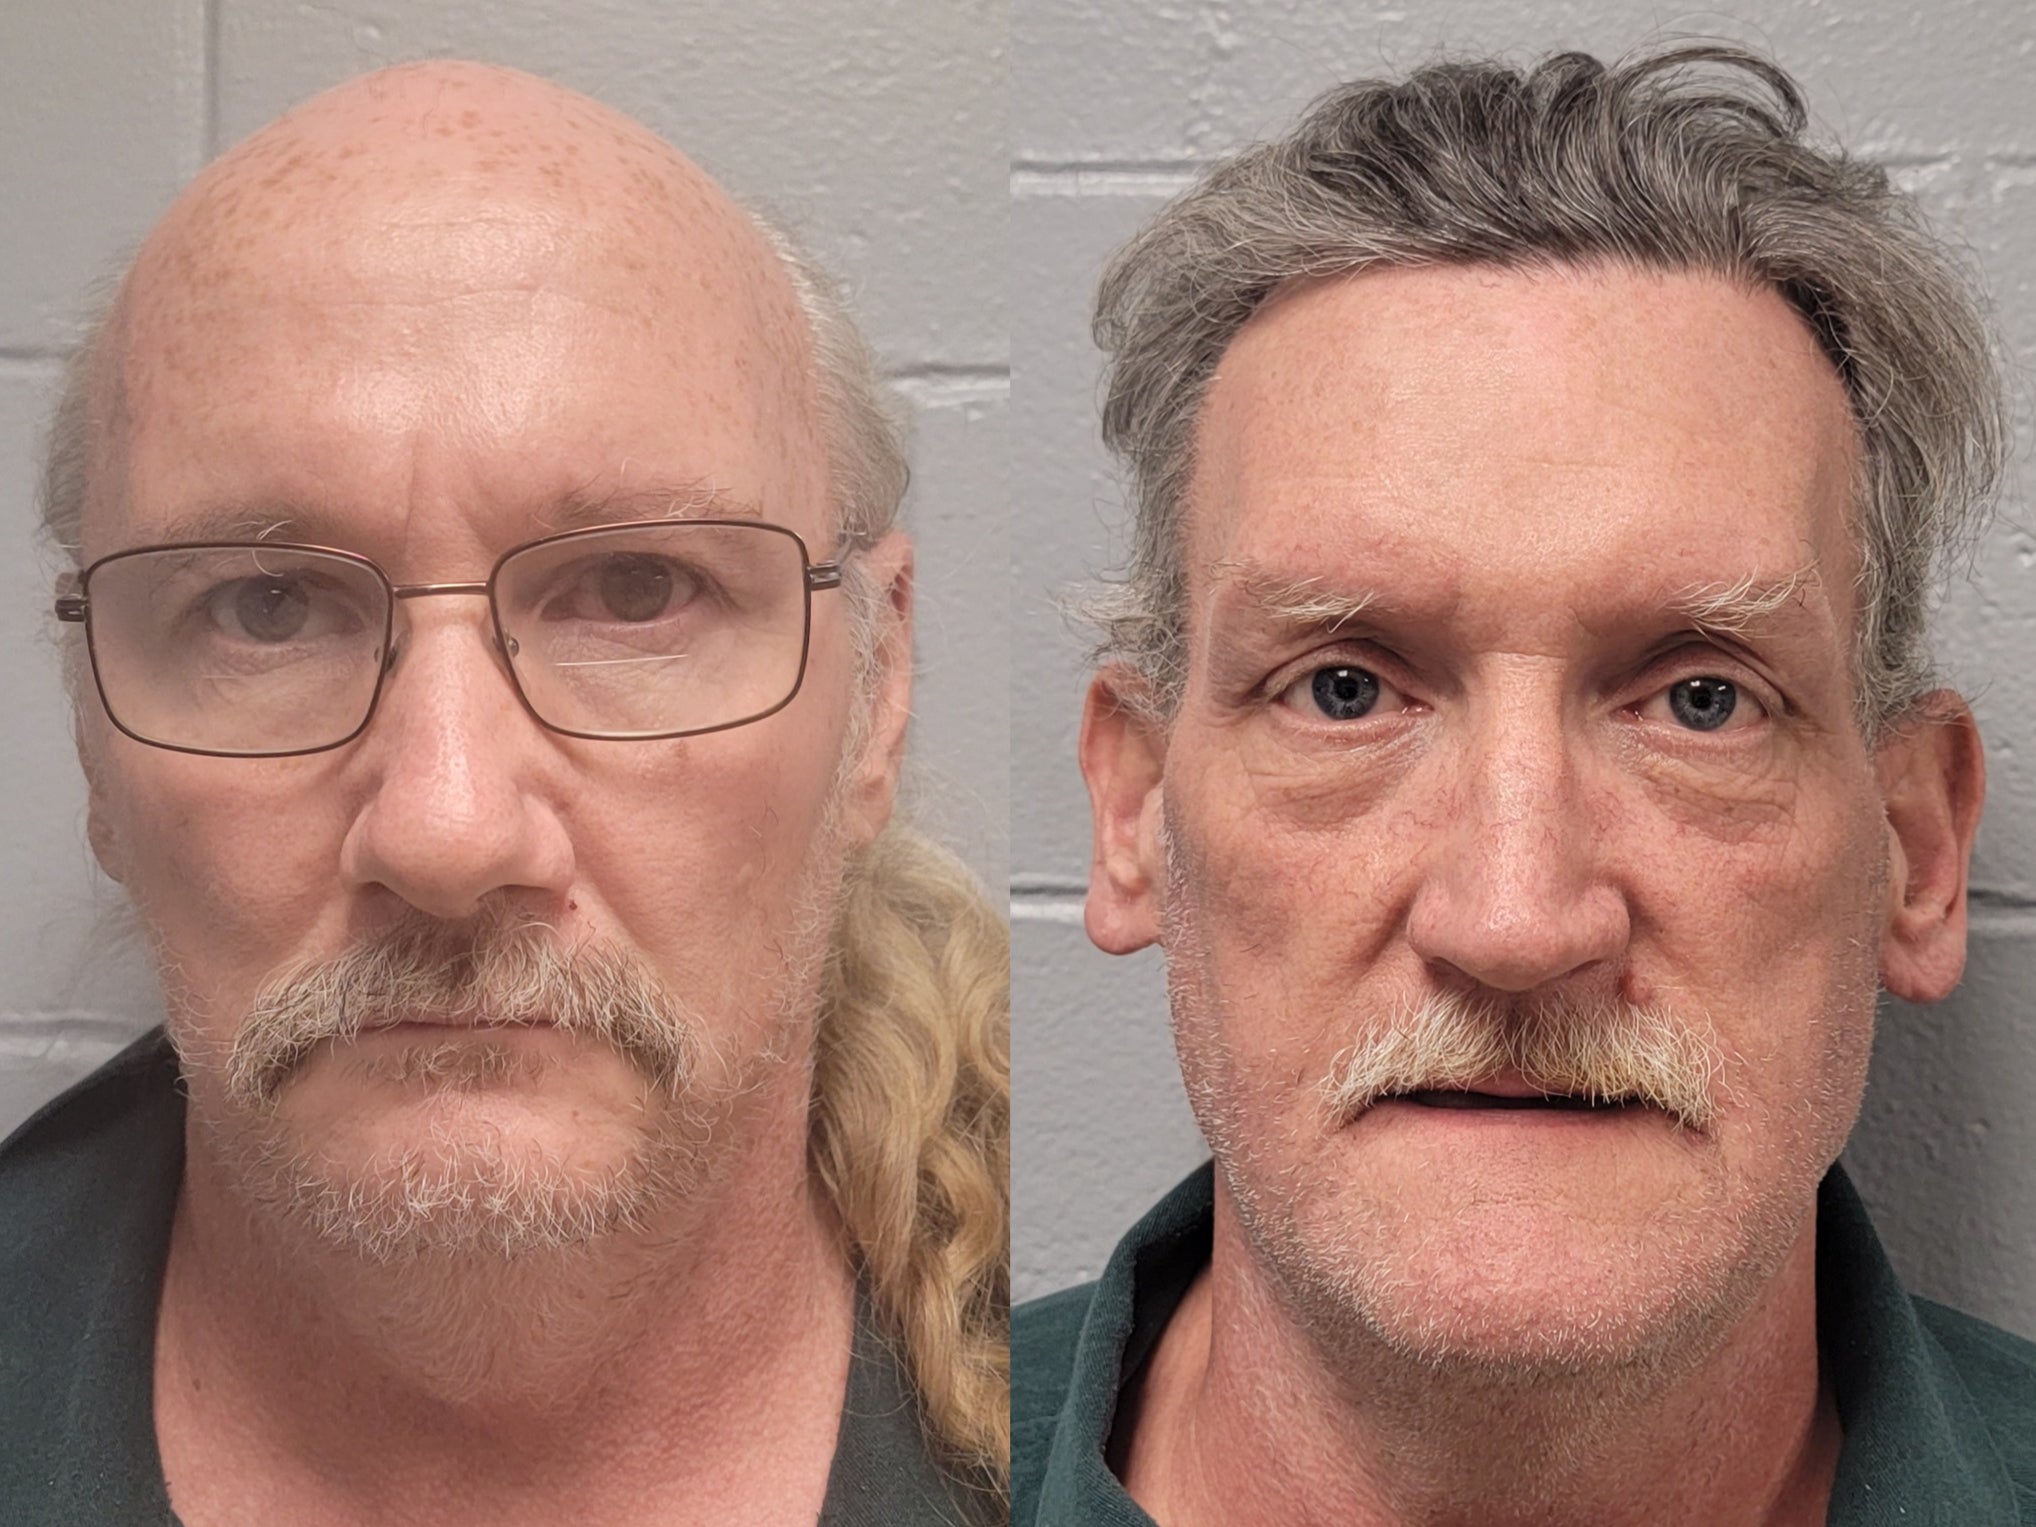 Two police mugshots are juxtaposed side by side. On the left is James Phelps, a white man in his late fifties. On the right is Timothy Norton, a white man in his late fifties.